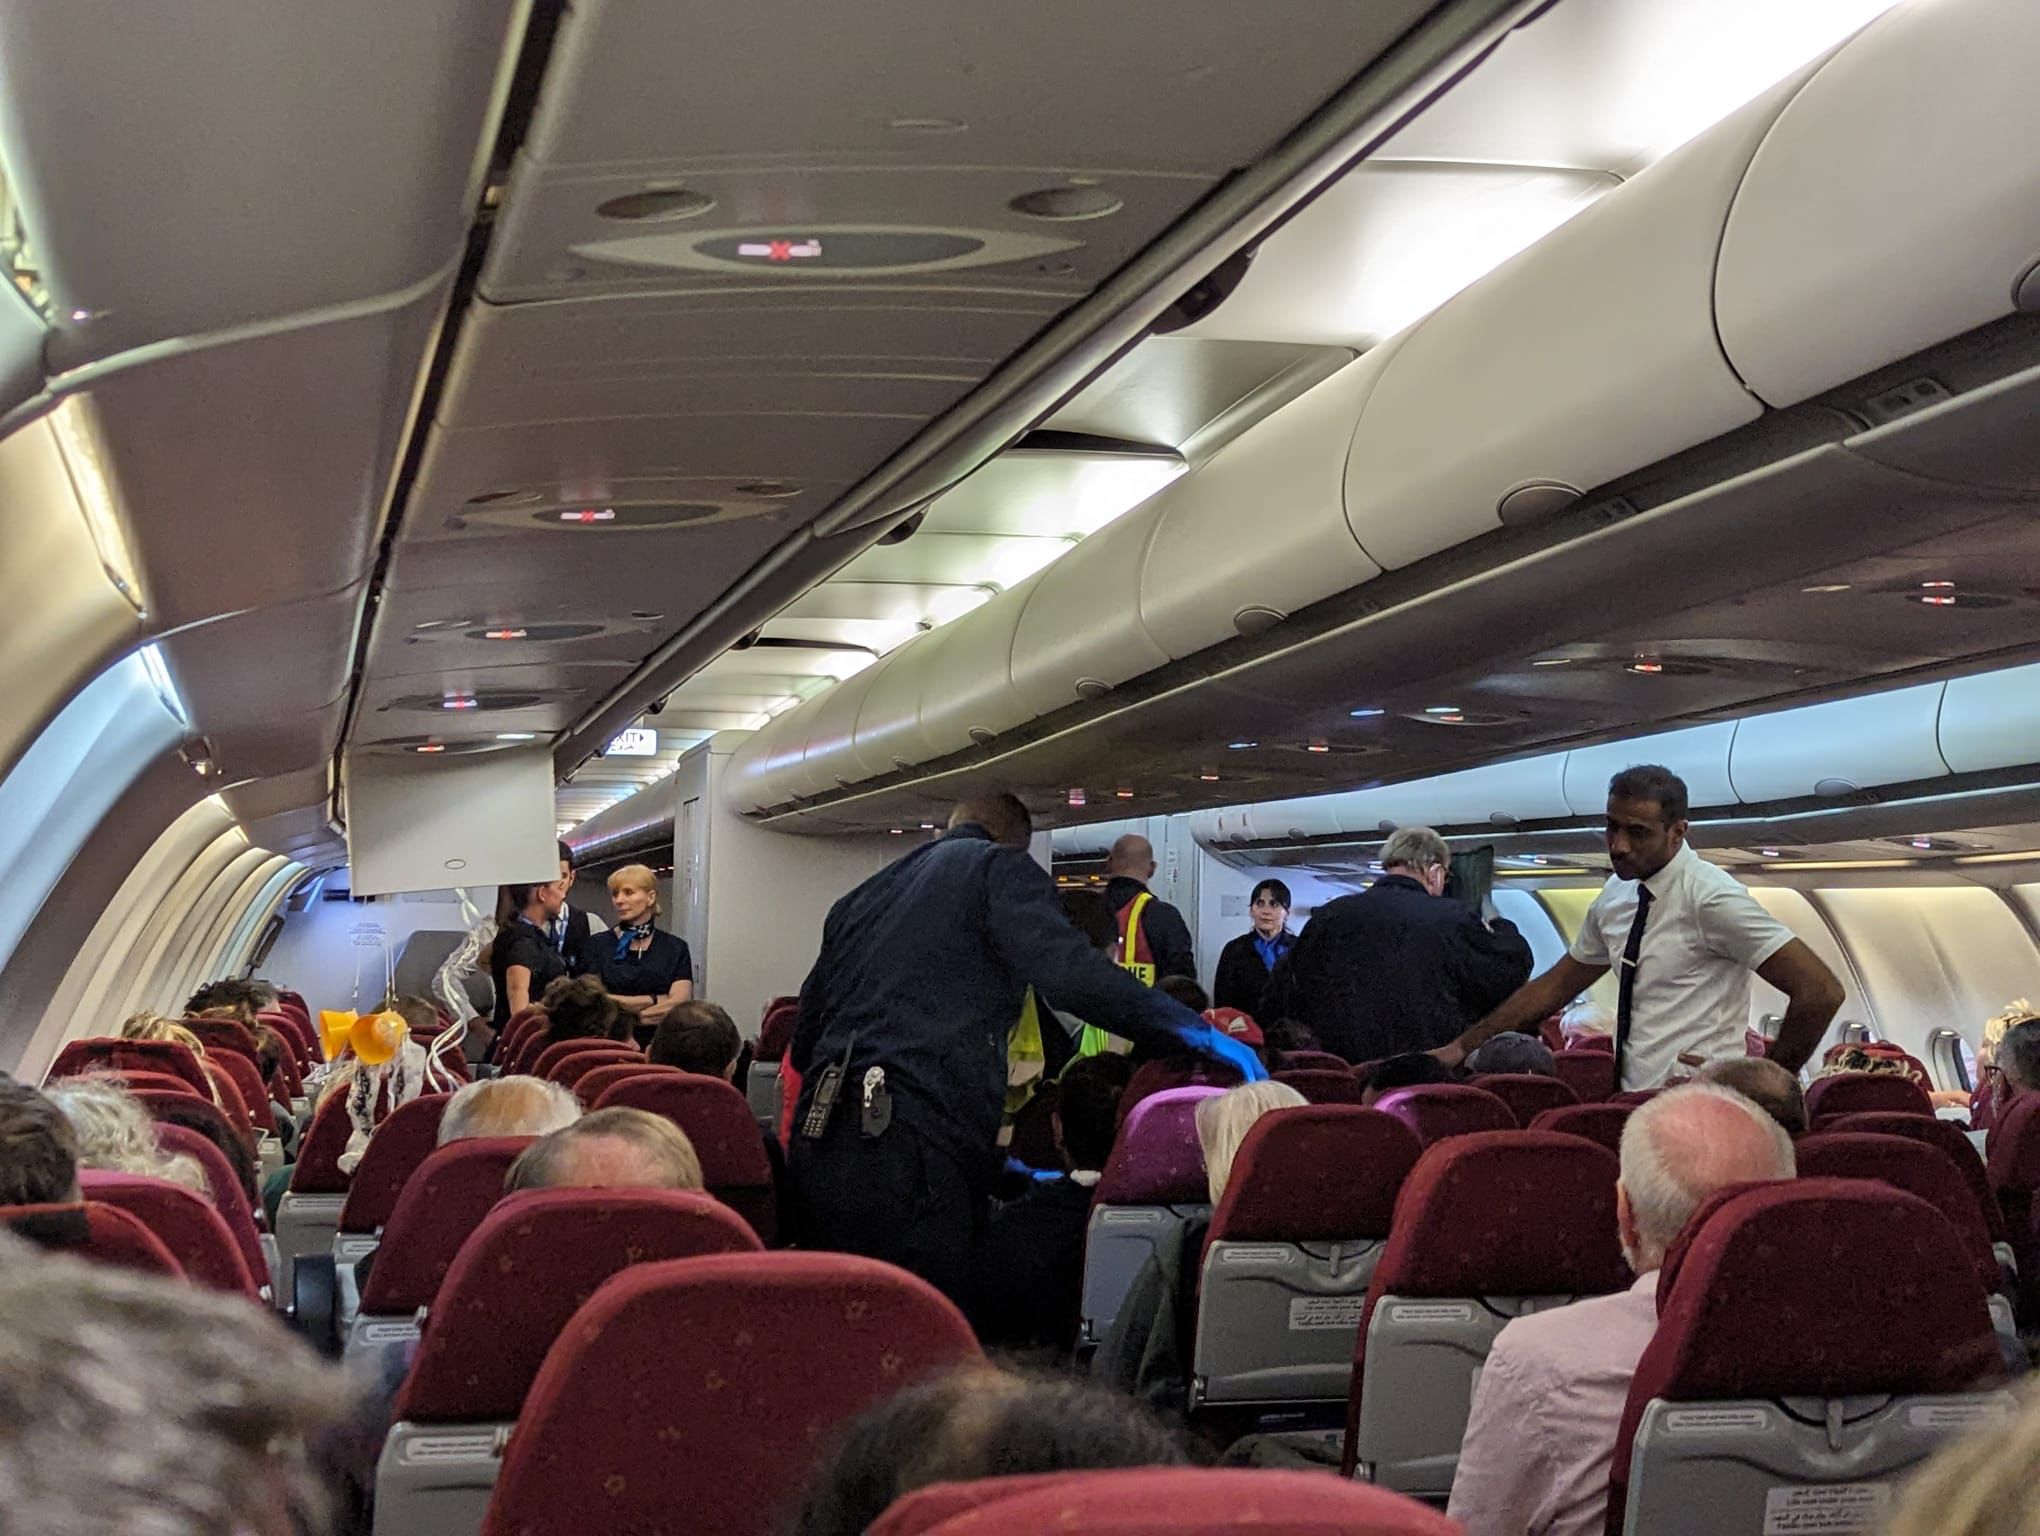 The flight from Barbados bound for Manchester was diverted to Bermuda